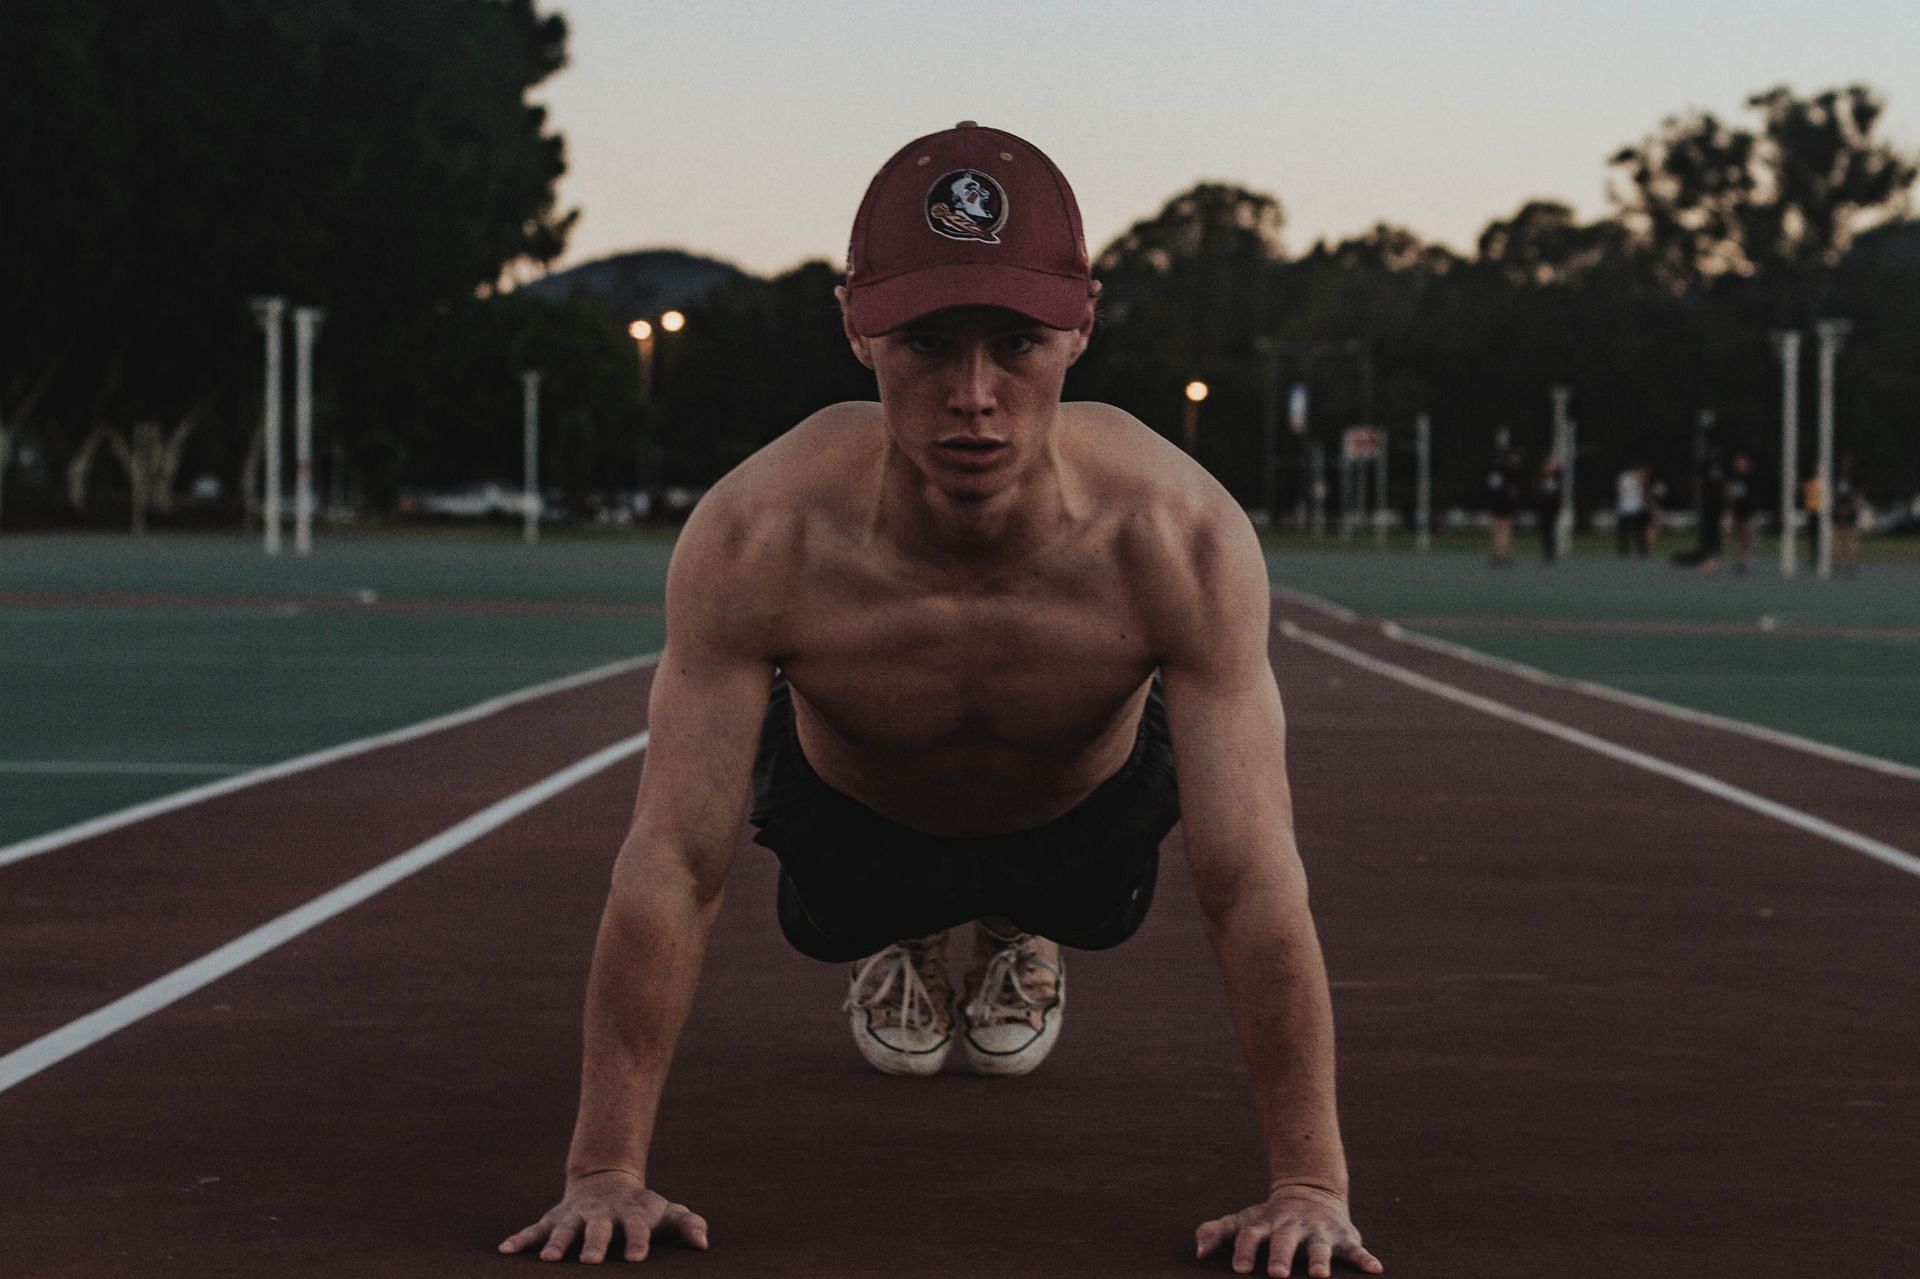 Slider exercises to effectively challenge and engage your core muscles (Image via Unsplash/James Barr)